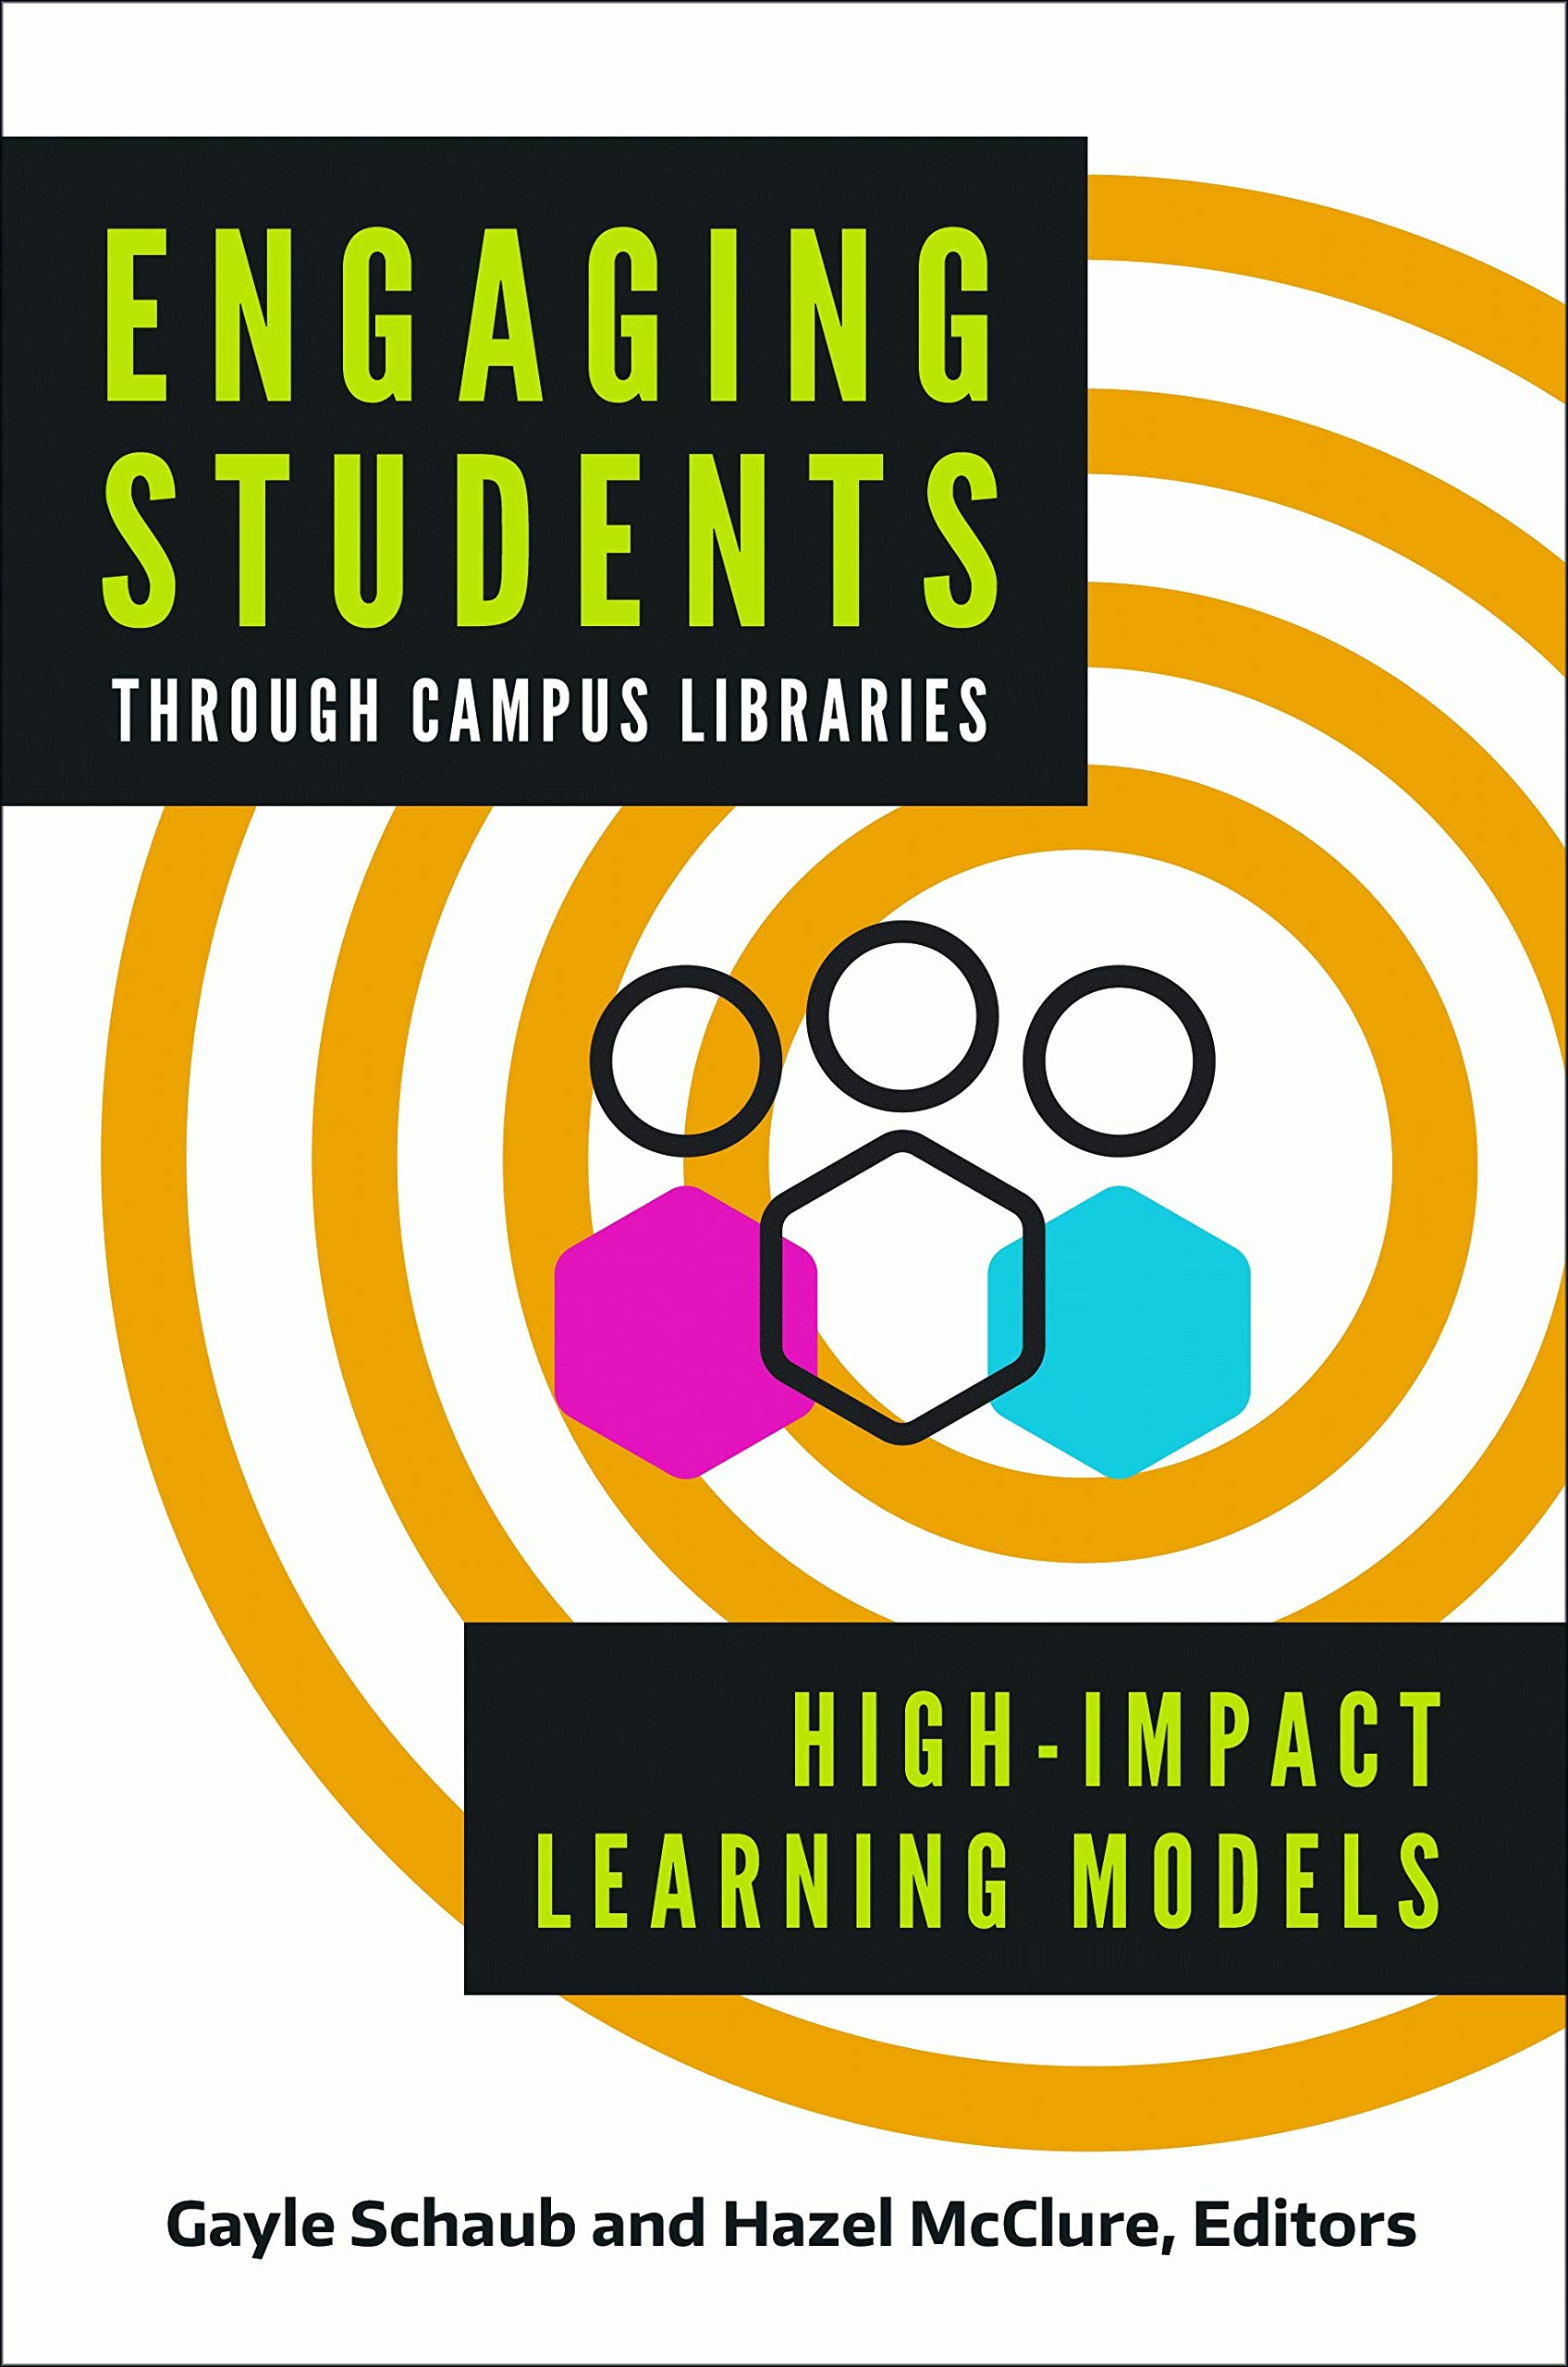 More than an internship: A student-led learning community for instructional design. In Engaging Students Through Campus Libraries: High-Impact Learning Models cover page